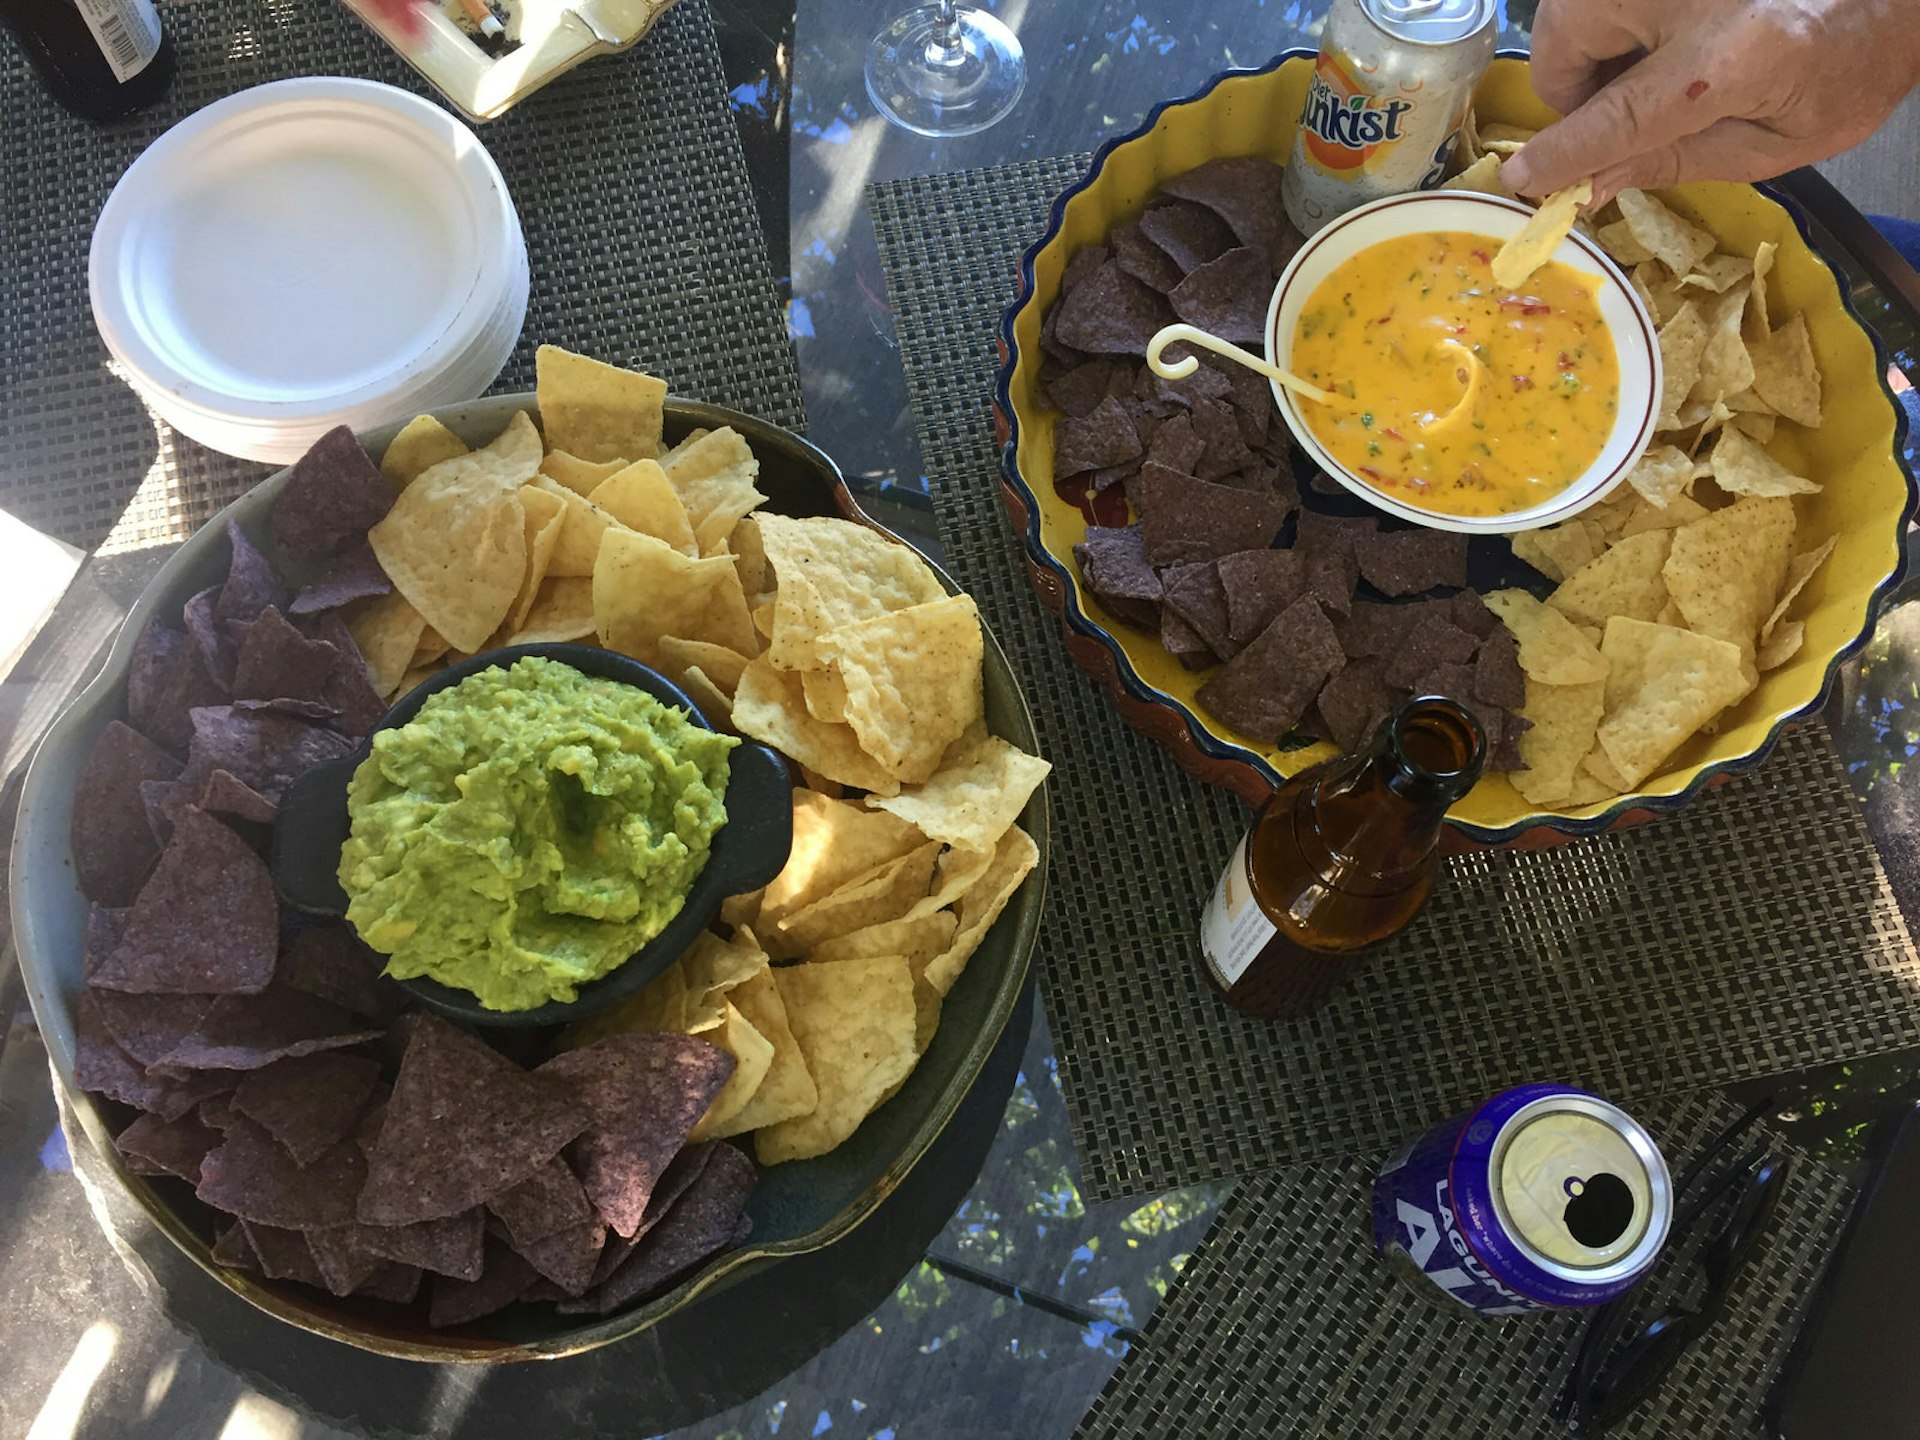 Blue corn chips with homemade guacamole and green-chile queso – a staple New Mexican appetizer © Megan Eaves / Lonely Planet